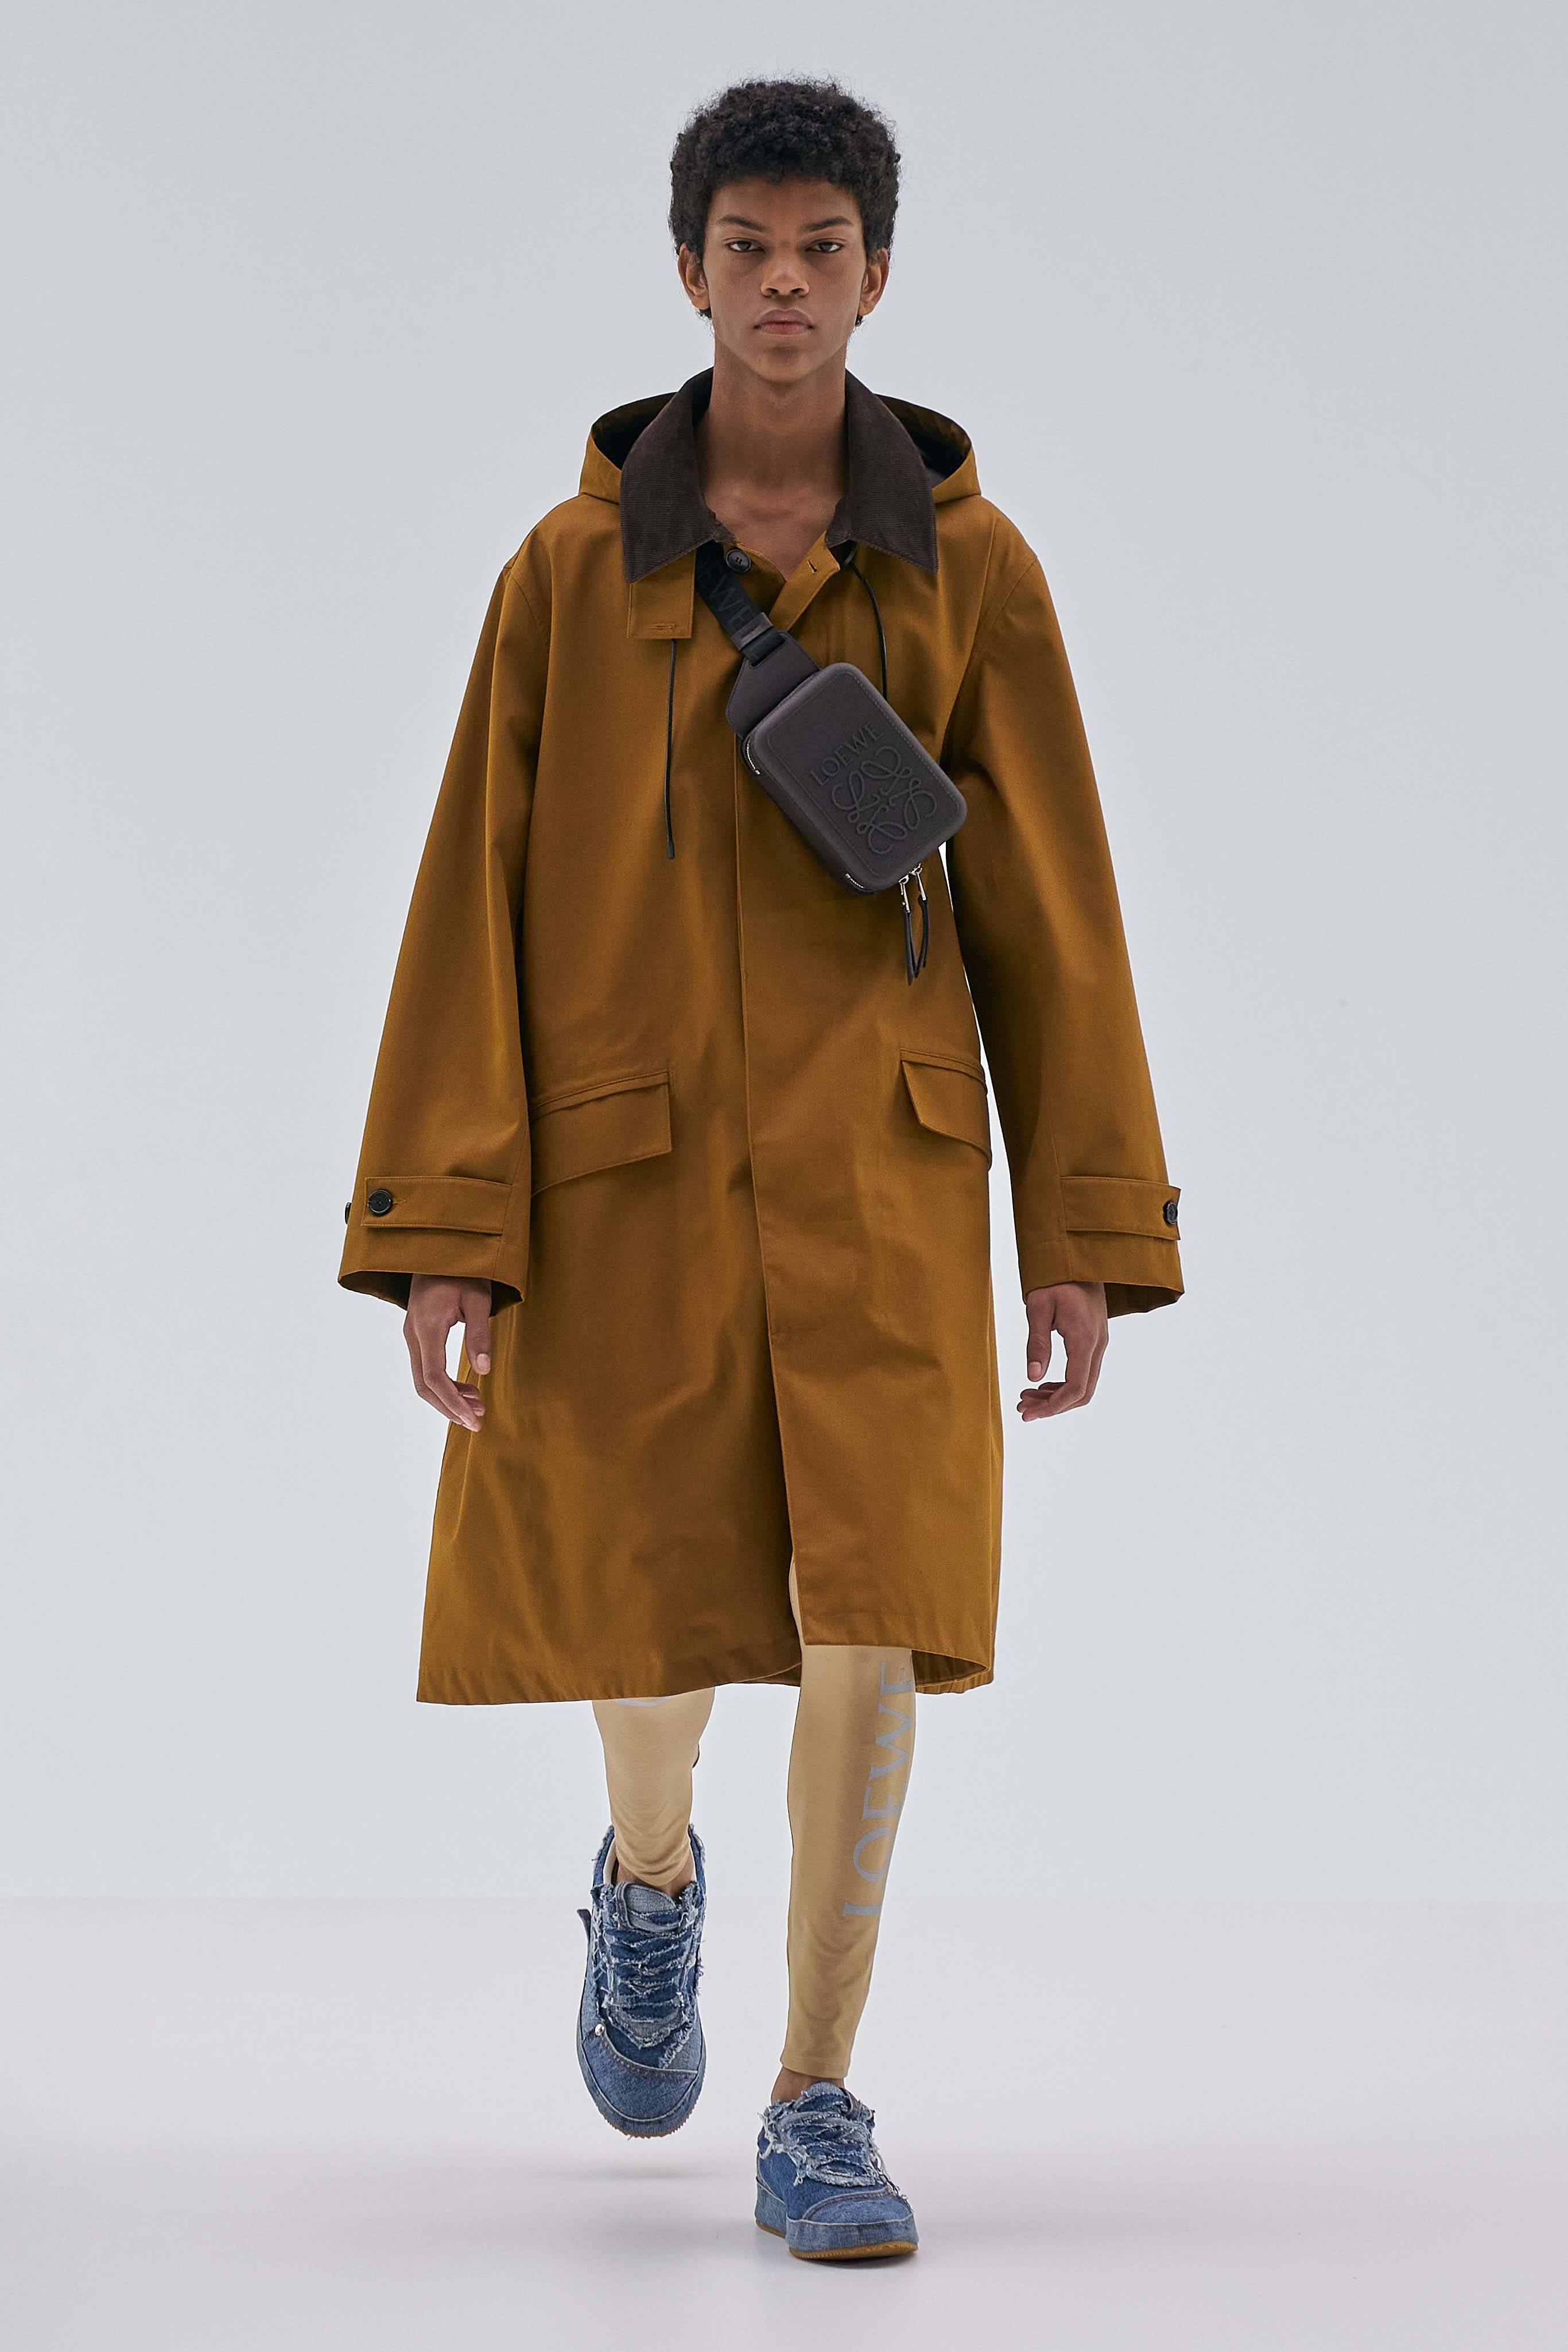 Loewe's Spring-Summer 2023 menswear collection